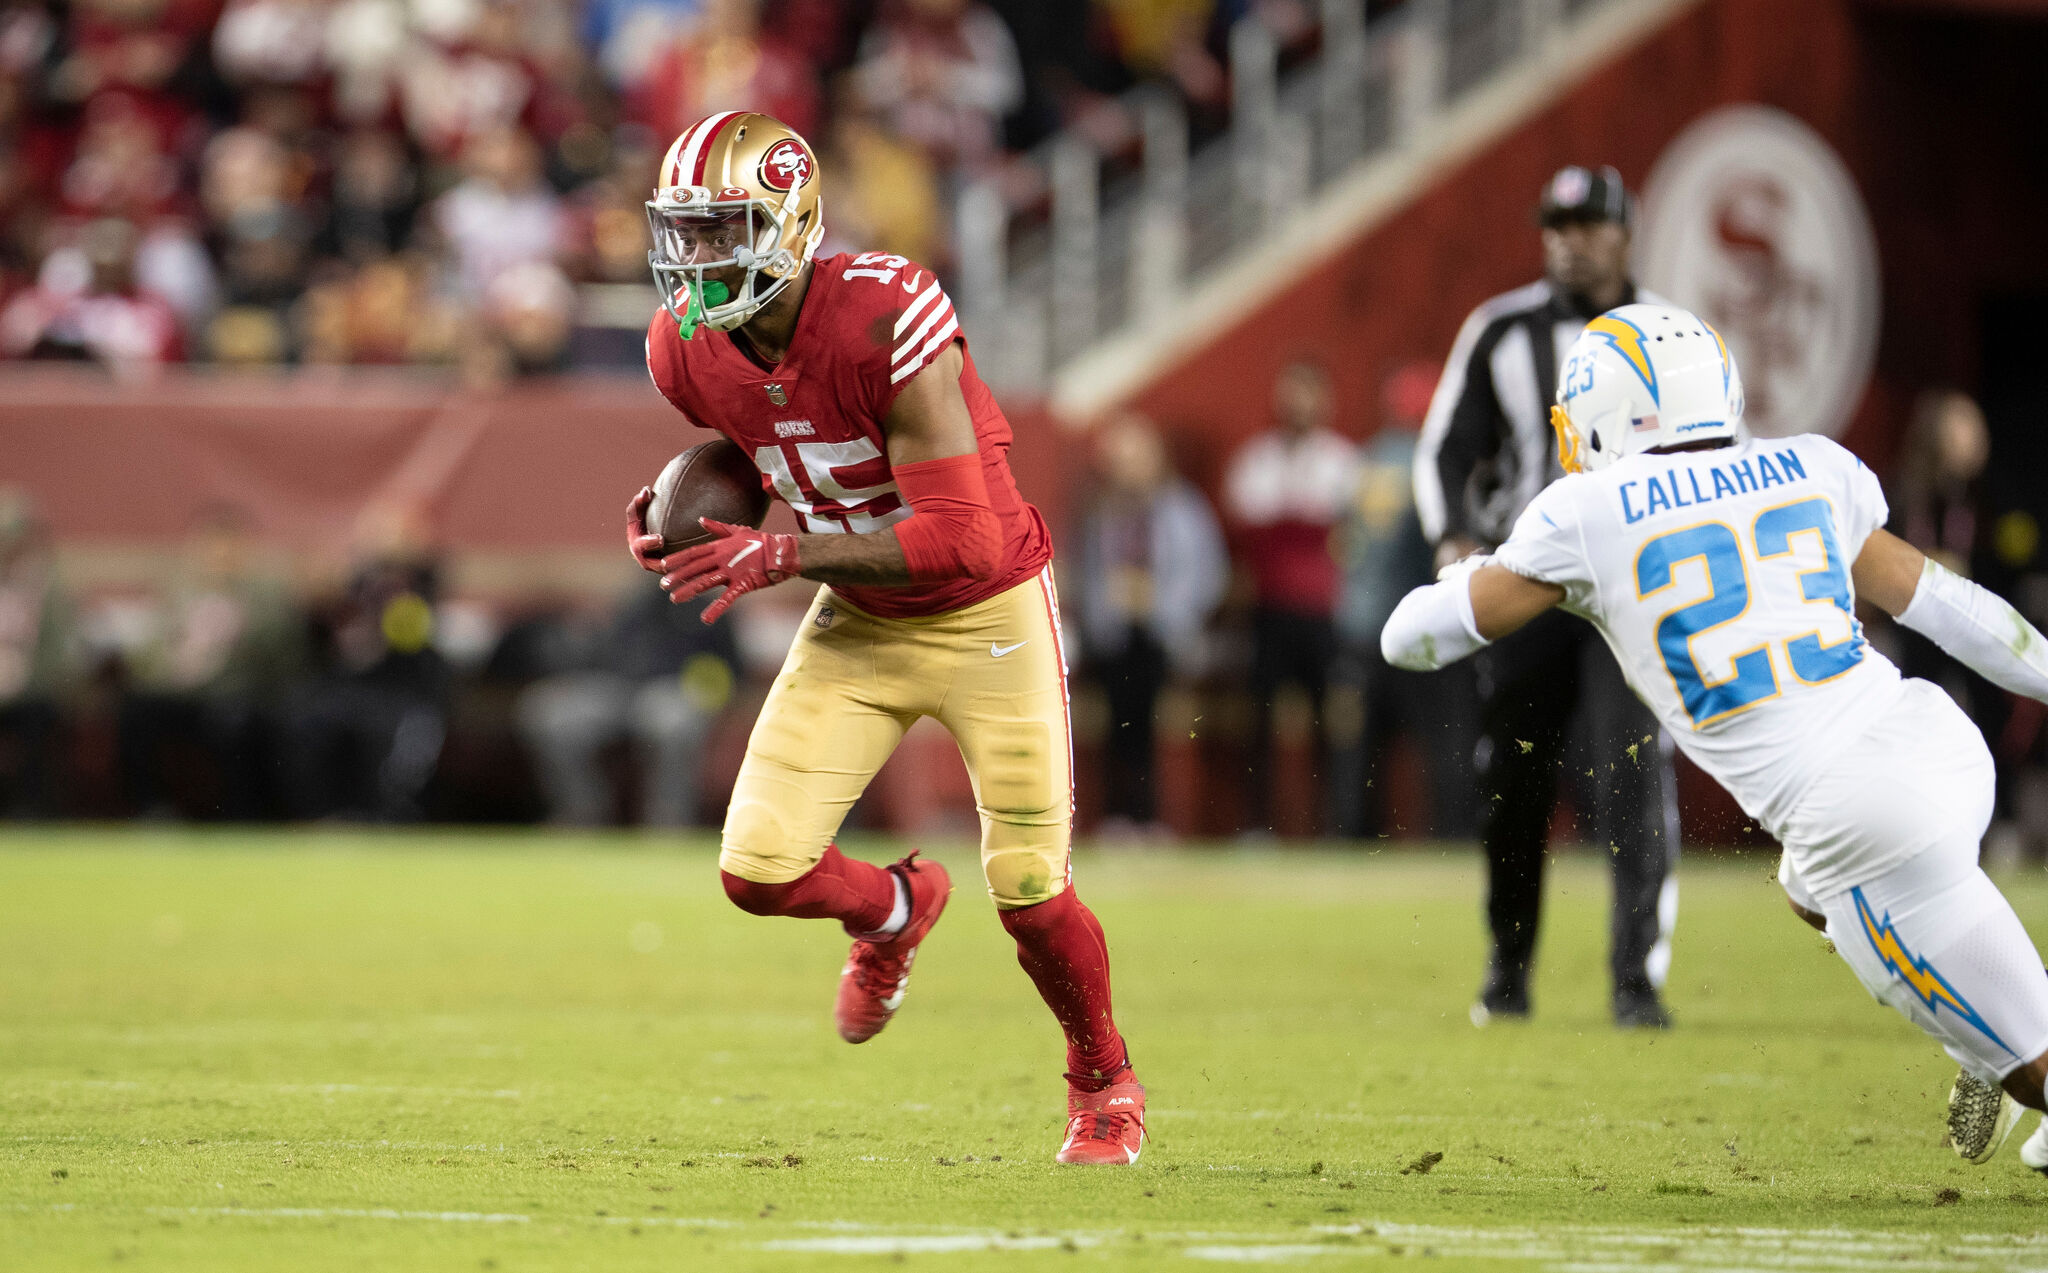 49ers vs. Chargers: How to watch, listen to 2023 NFL preseason finale